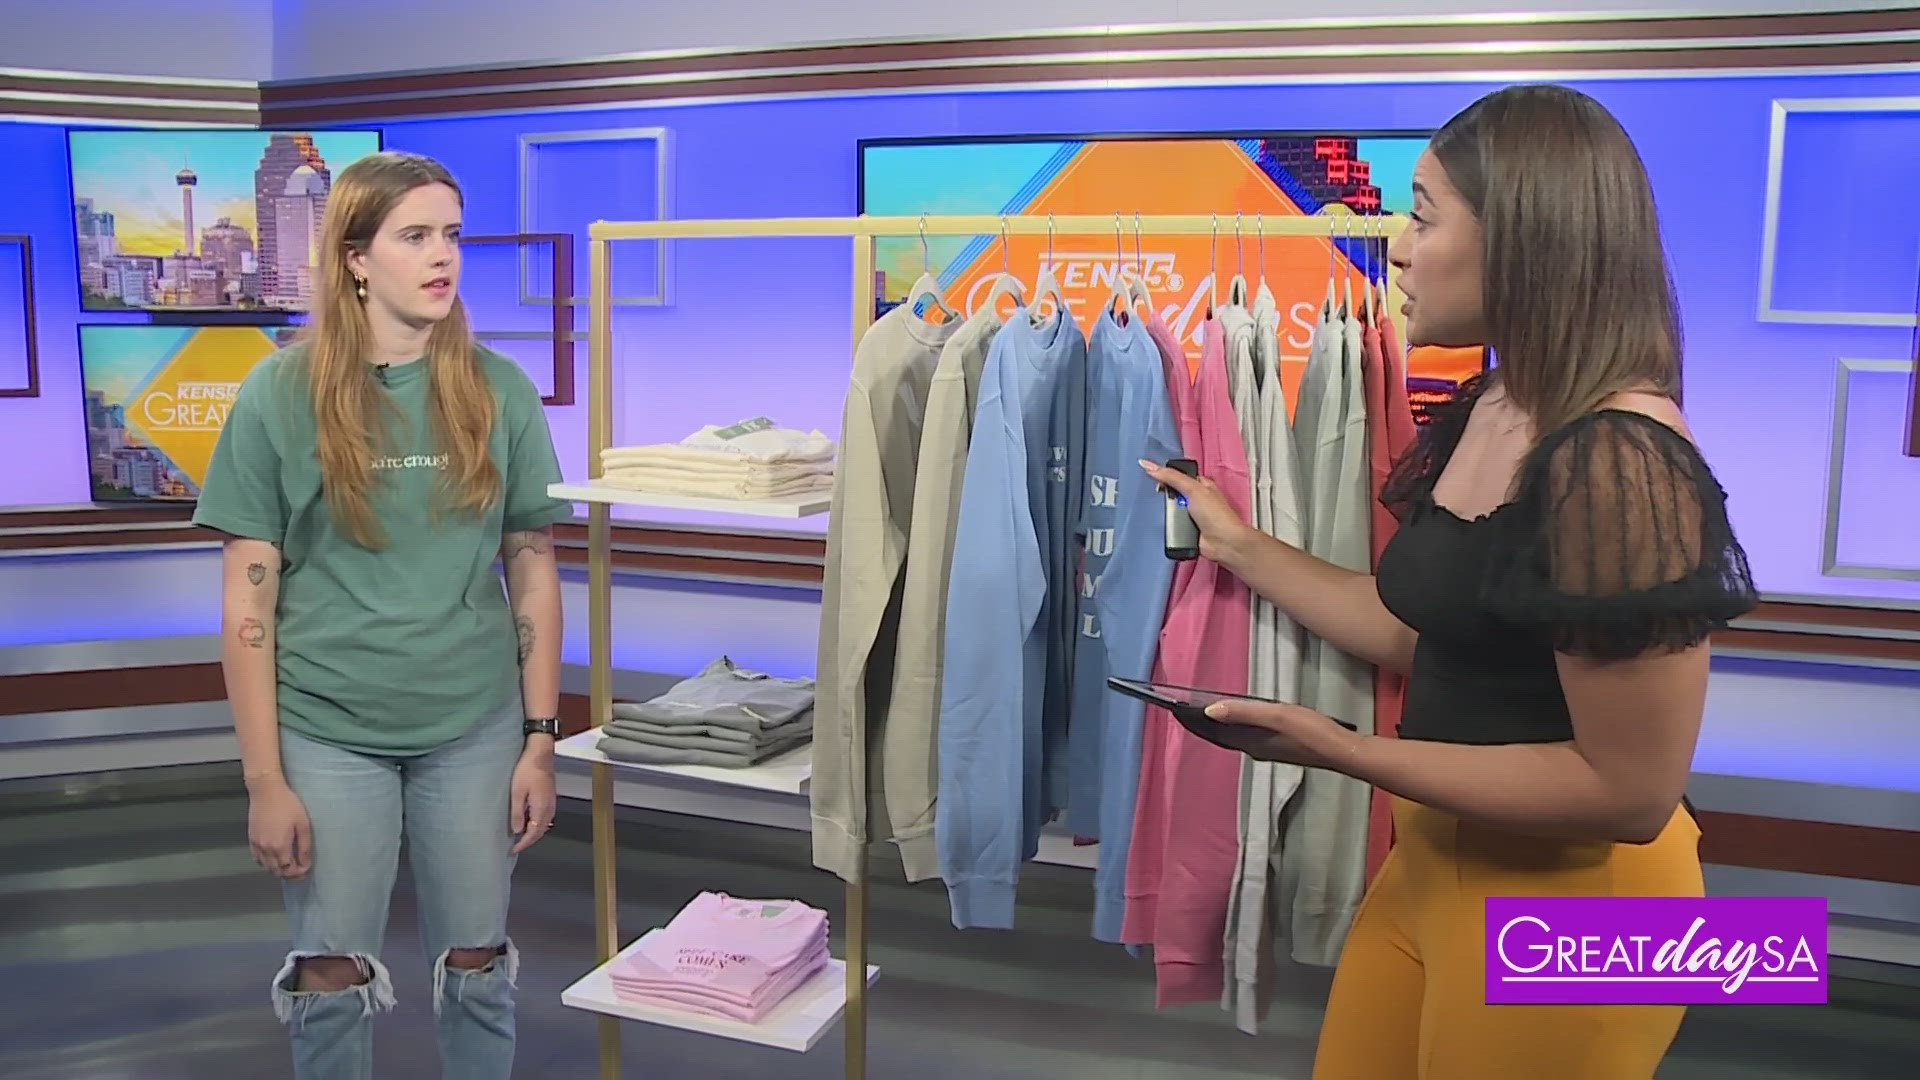 Emily Howell with Emily Grace Designs, Co. shares her inspiration to create comfortable and cute clothing designs.